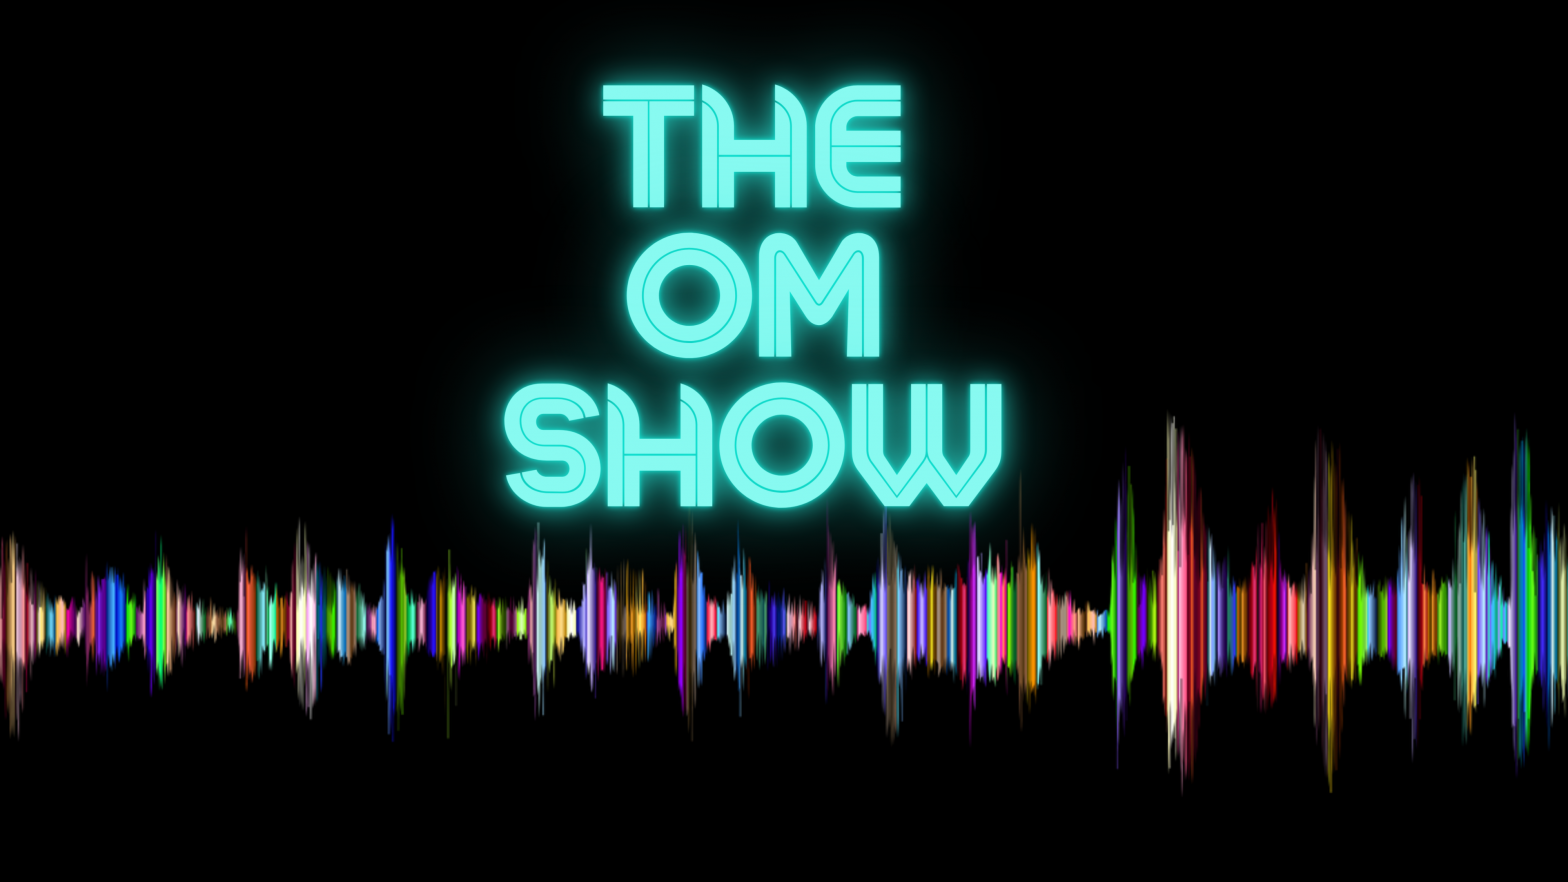 Black background with a multi-color soundwave. Glowing turquoise text: The Om Show